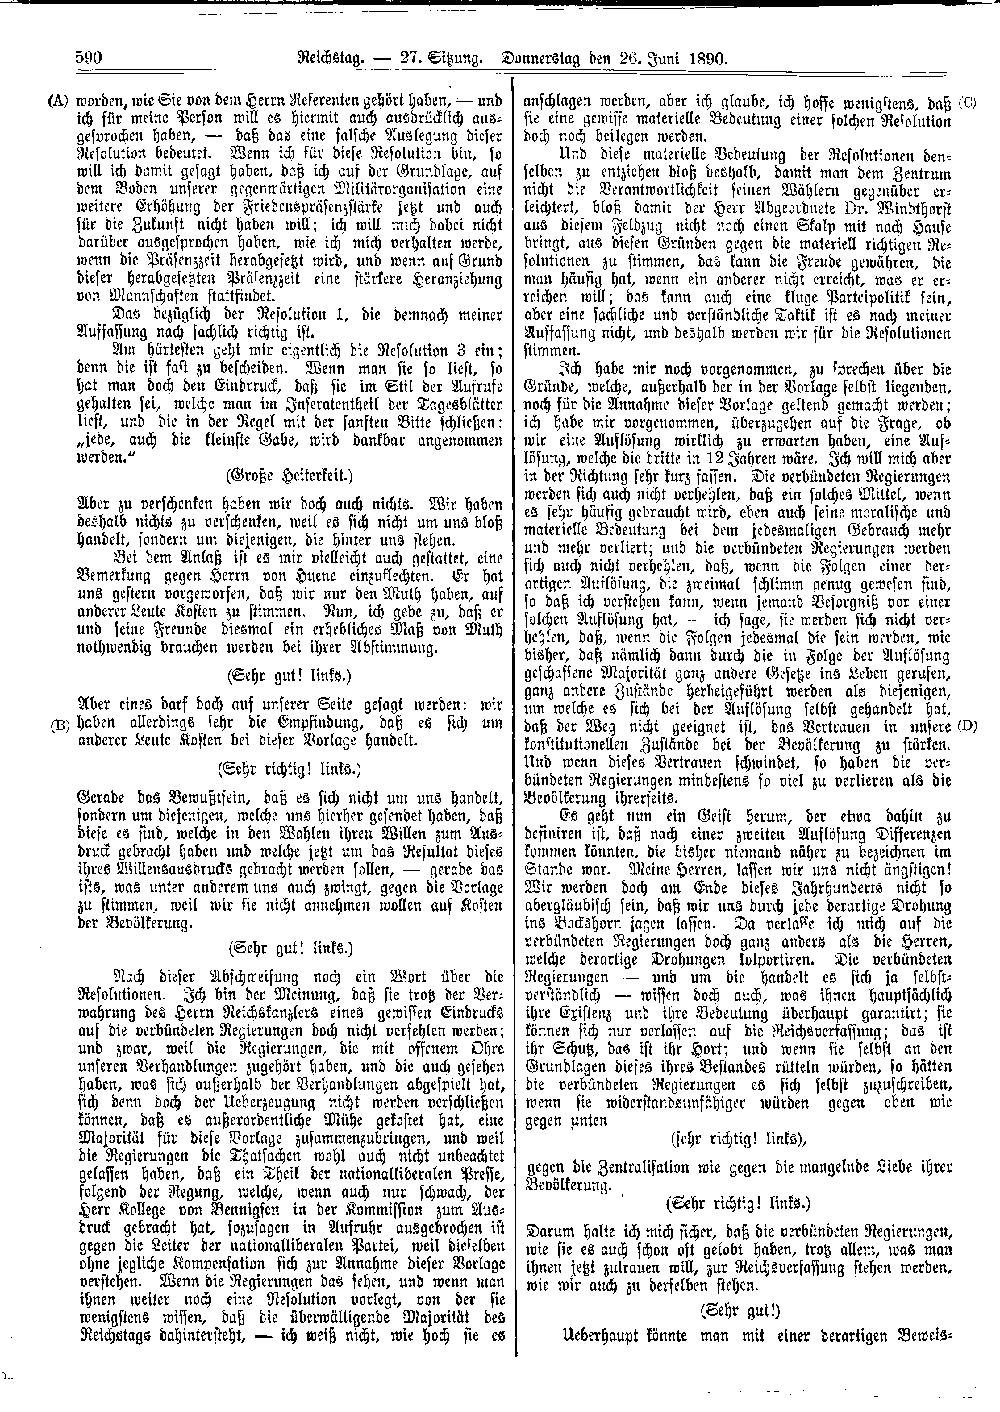 Scan of page 590